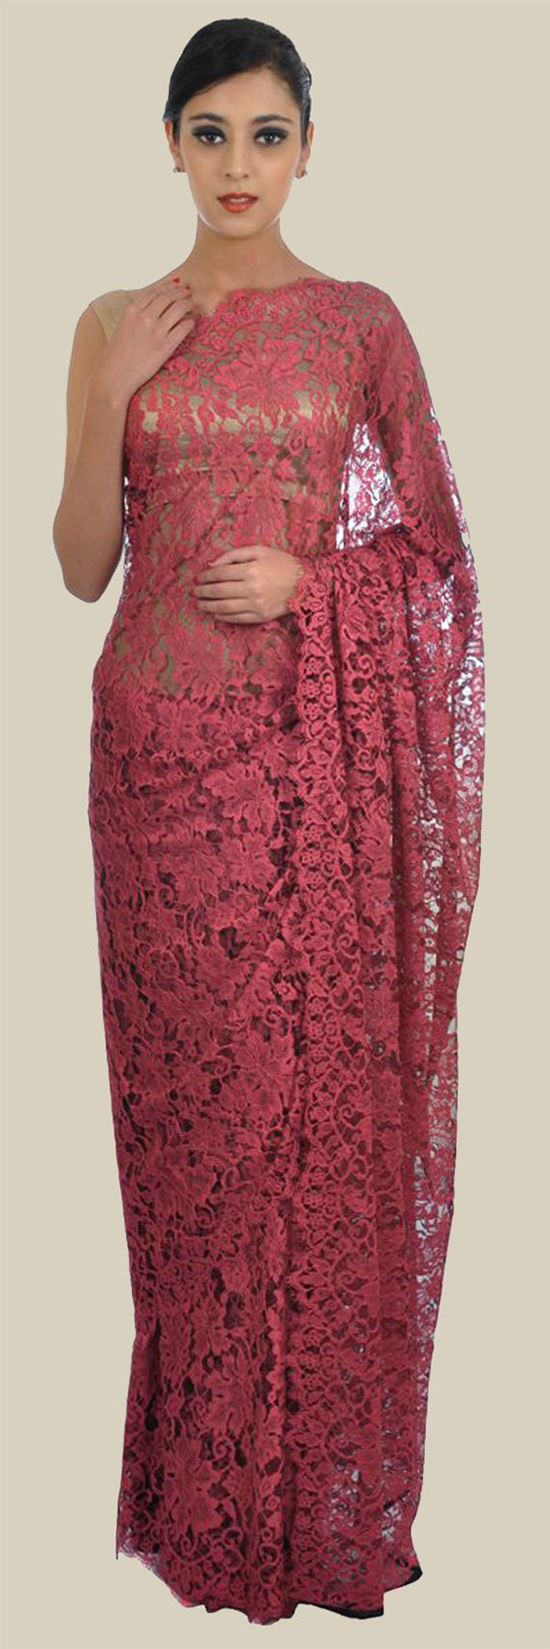 Cherry Red French Chantilly Lace Saree With Crepe Tissue Blouse